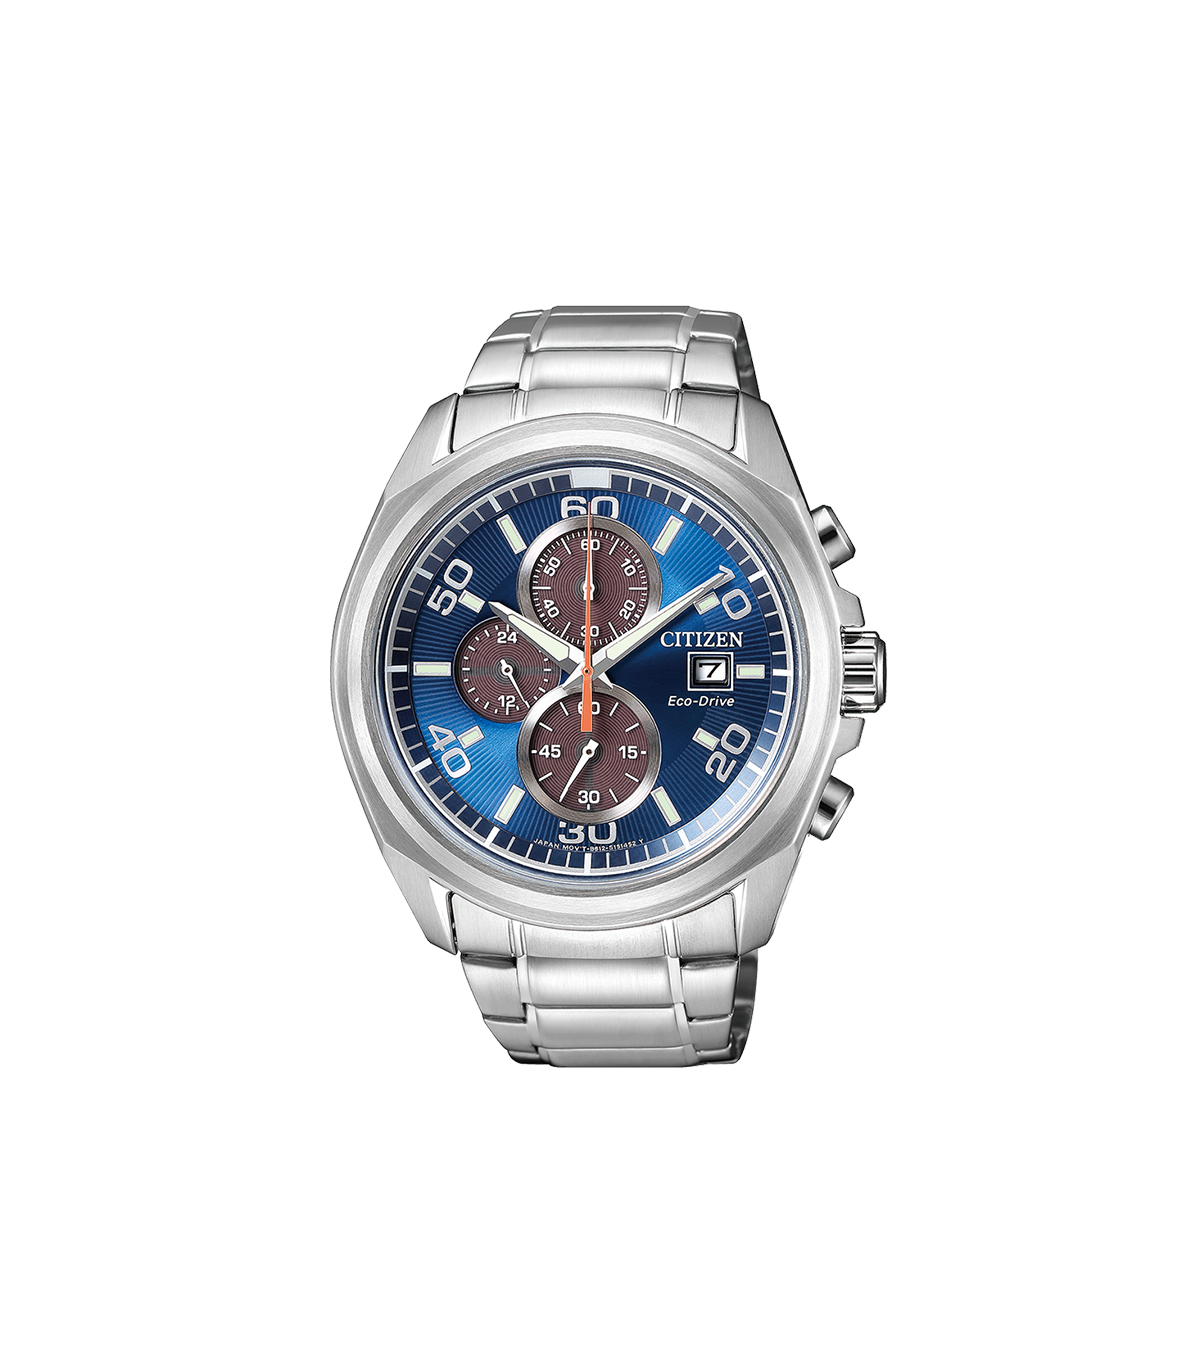 CITIZEN WATCH 0 CRONO OF COLLECTION -